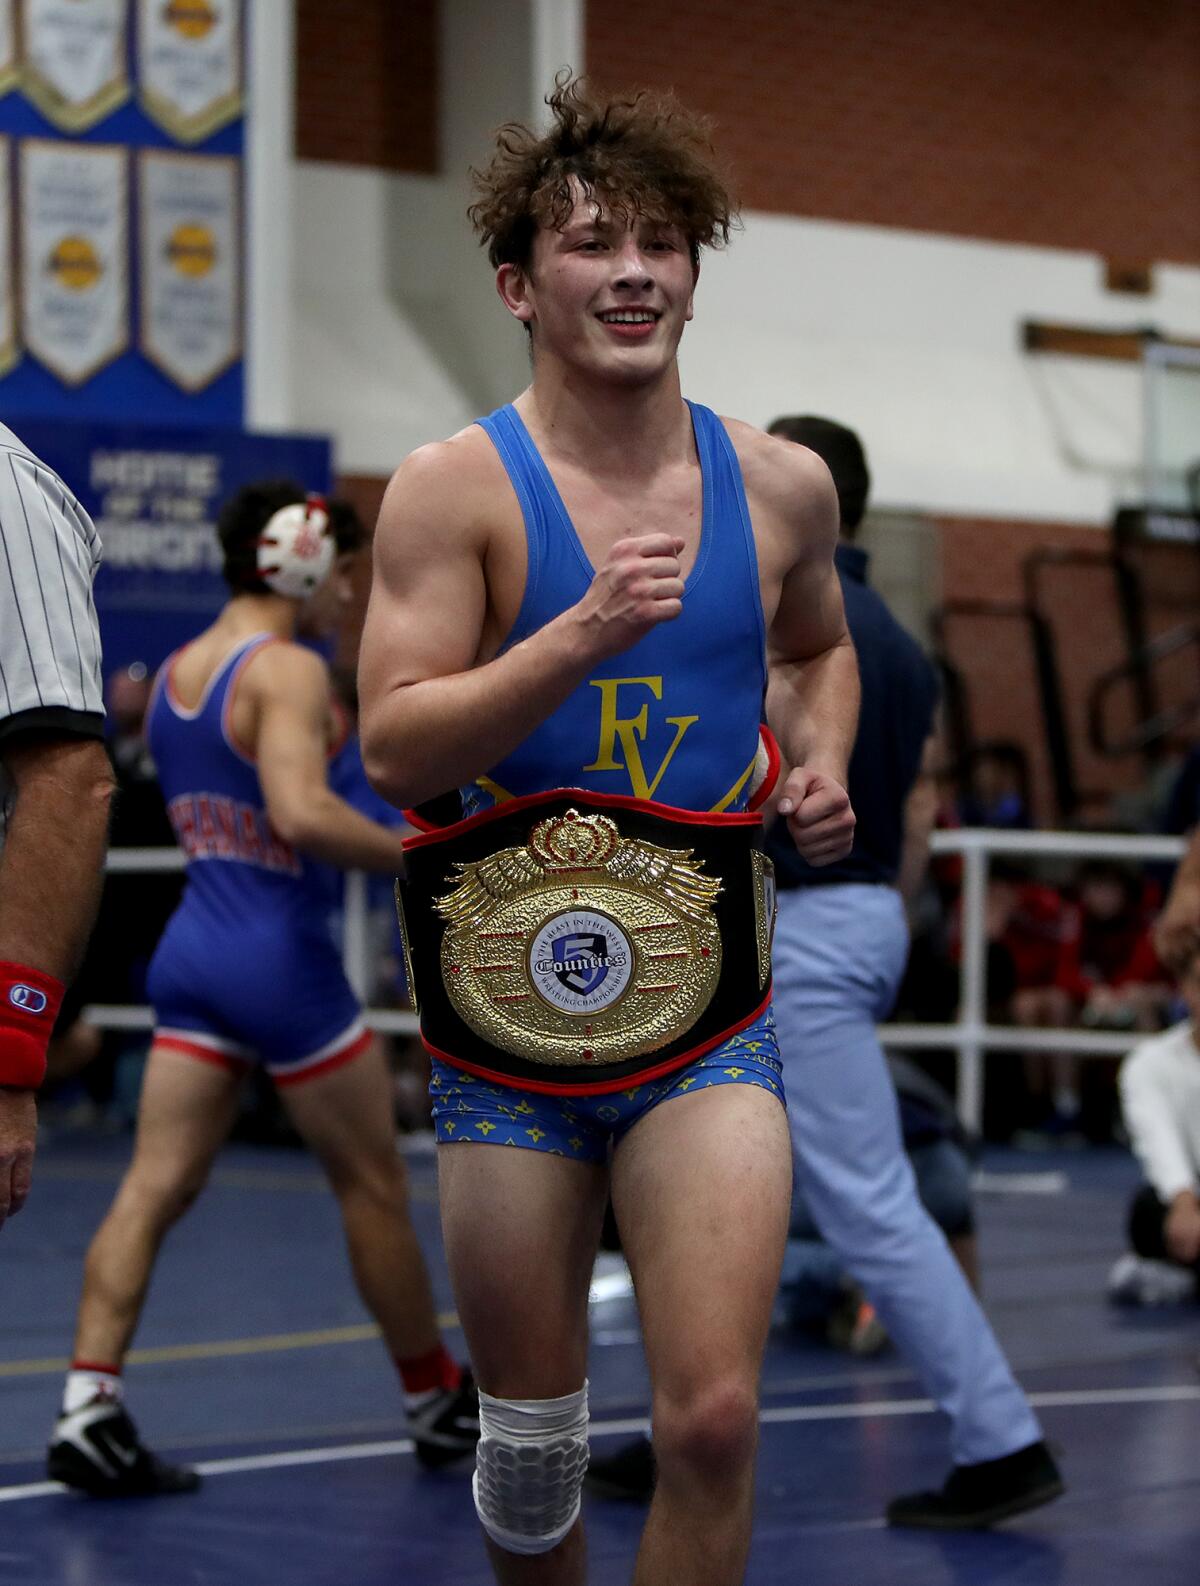 Fountain Valley's Justin Rodriguez is all smiles after beating St. John Bosco's Grigor Cholakyan in the 126-pound final.